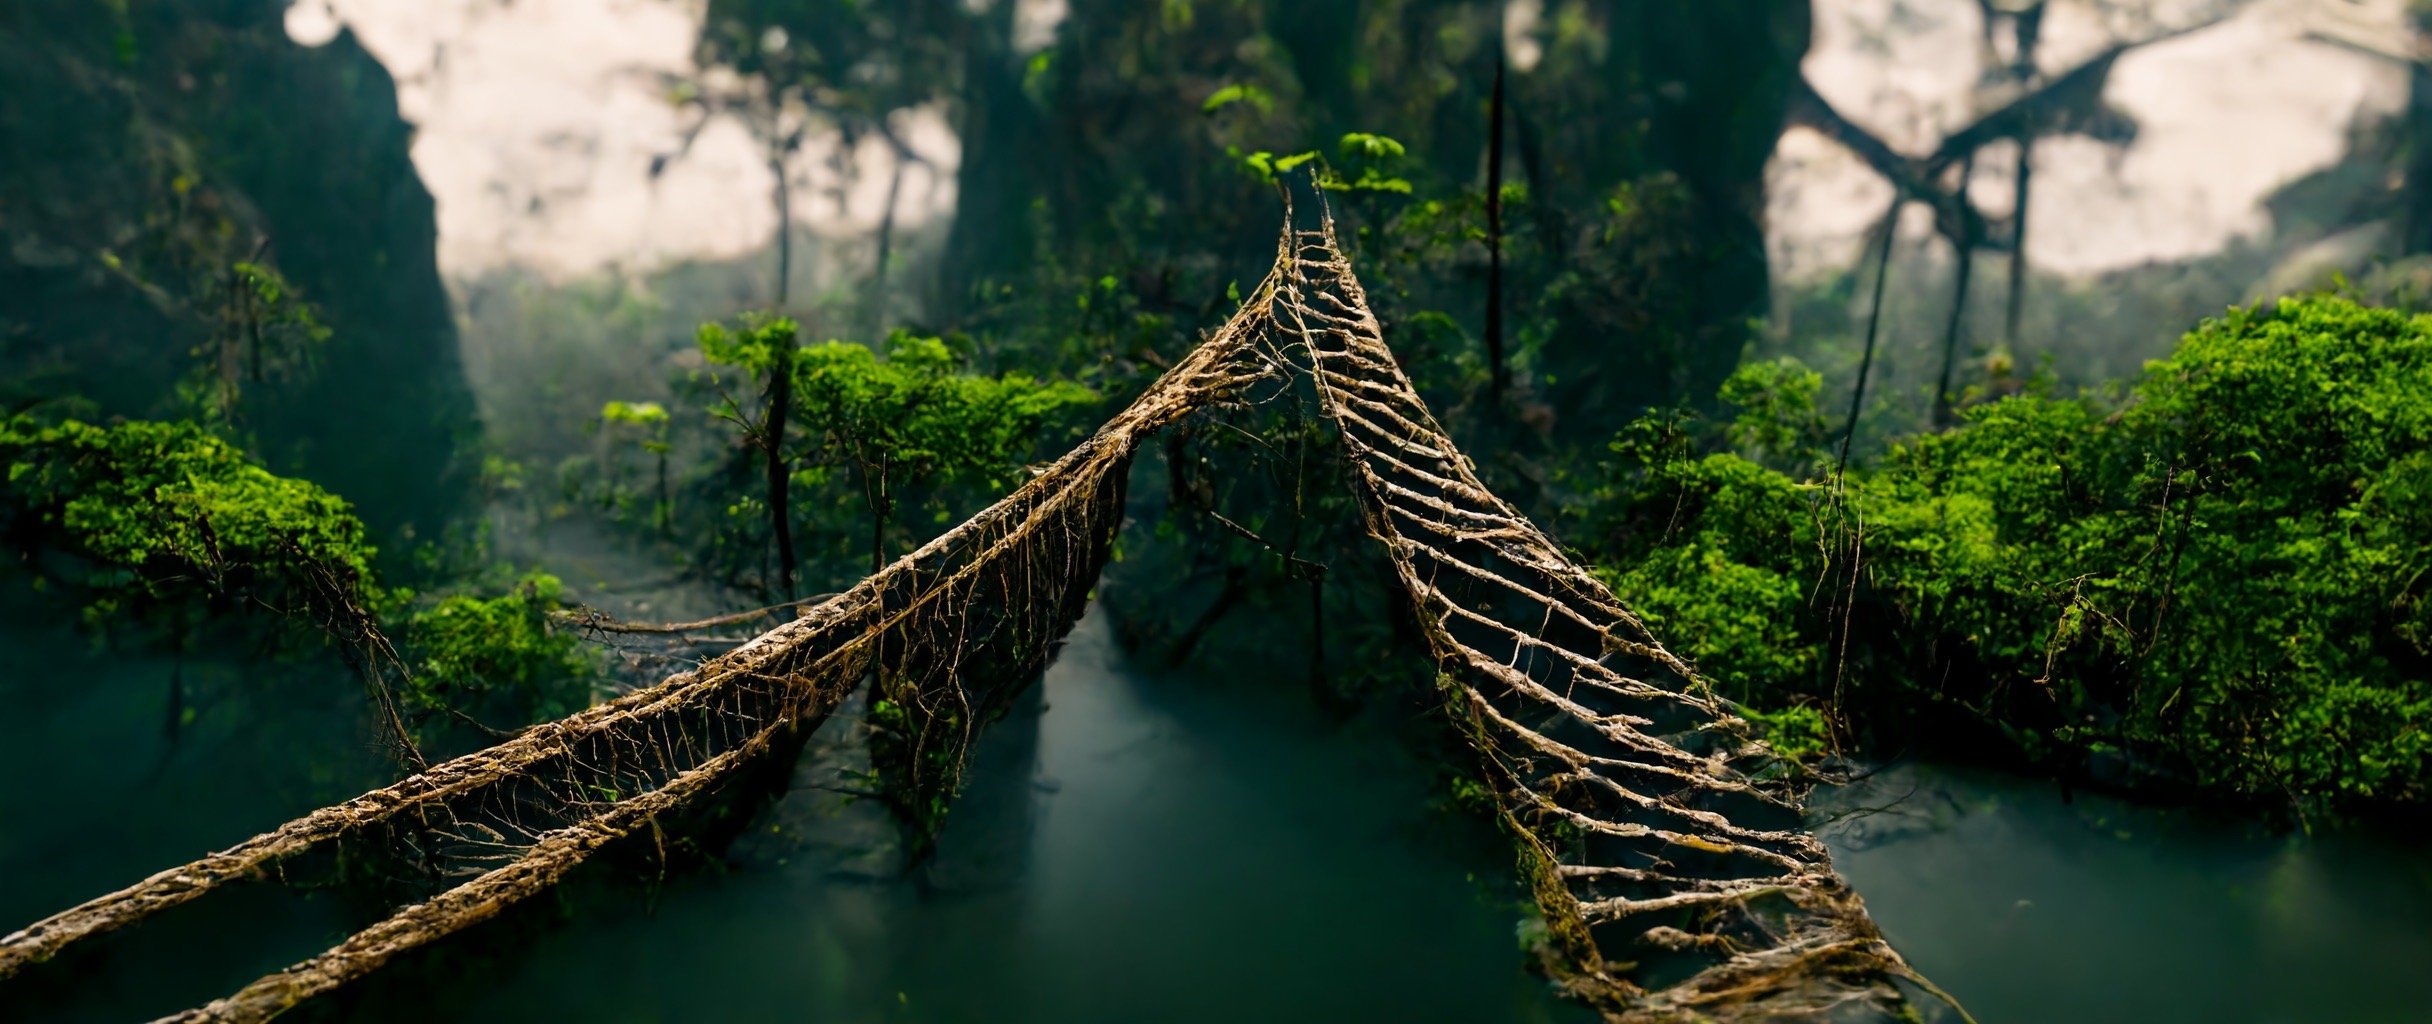 3bb4e624-0ba3-4aa7-8c4c-c9ddf6519a85_S3RAPH_single_Old_rope_bridge_with_missing_wooden_planks_and_cobwebs_crossing_Chasm_in_a_lush_jungle_scene..JPG